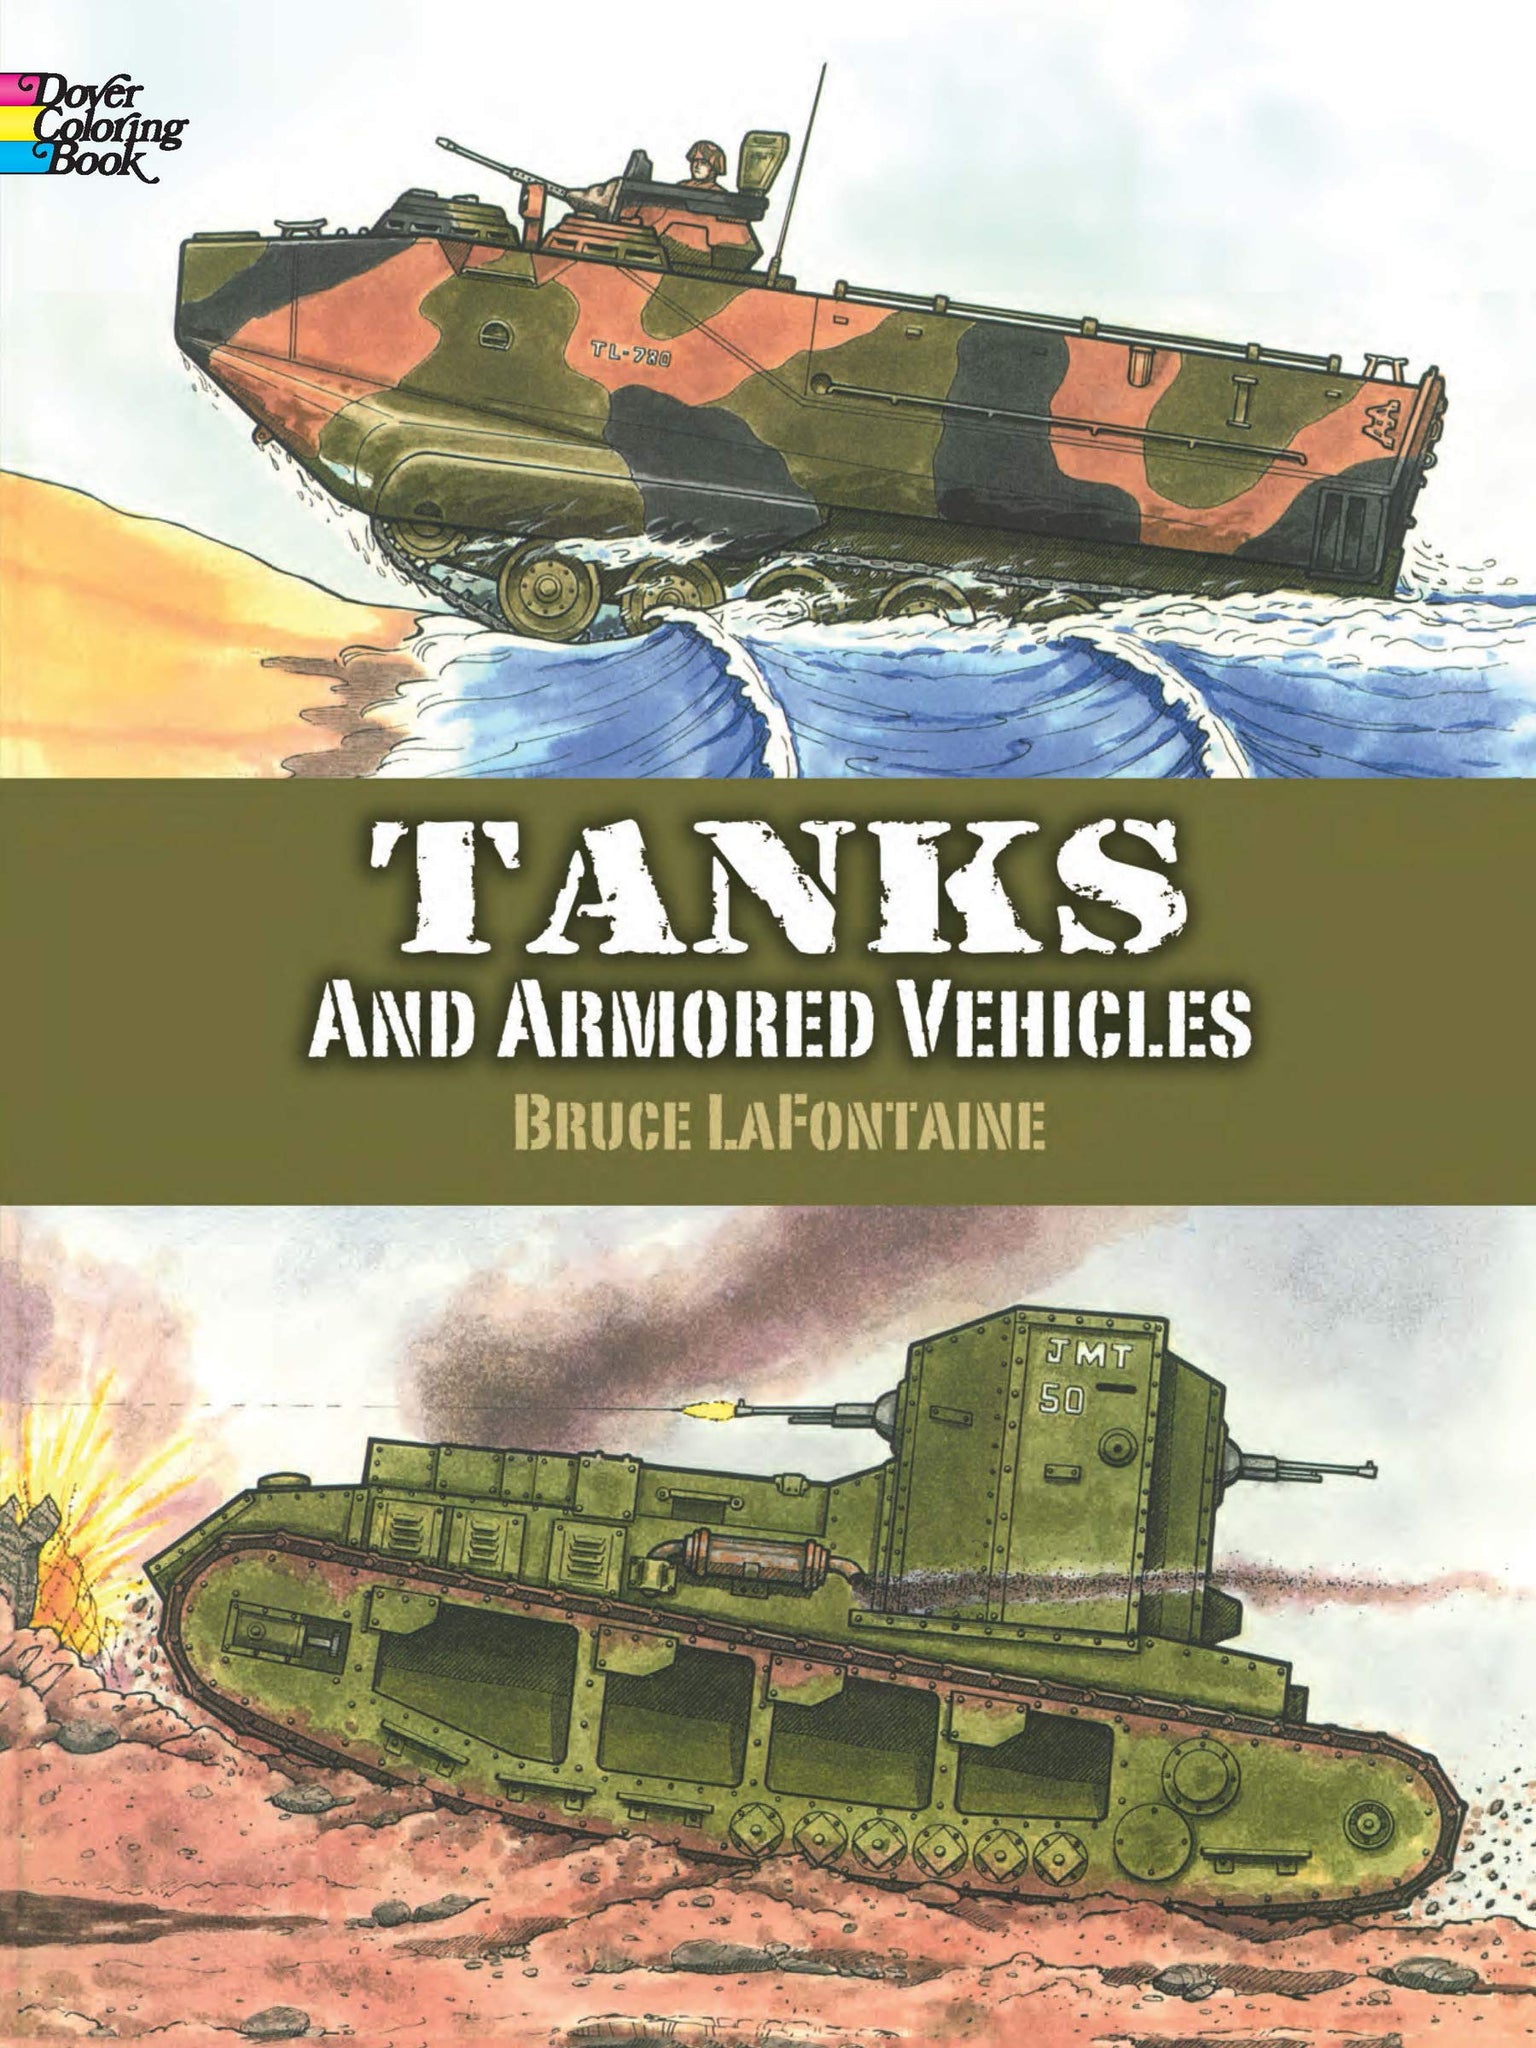 ww11 tanks coloring pages